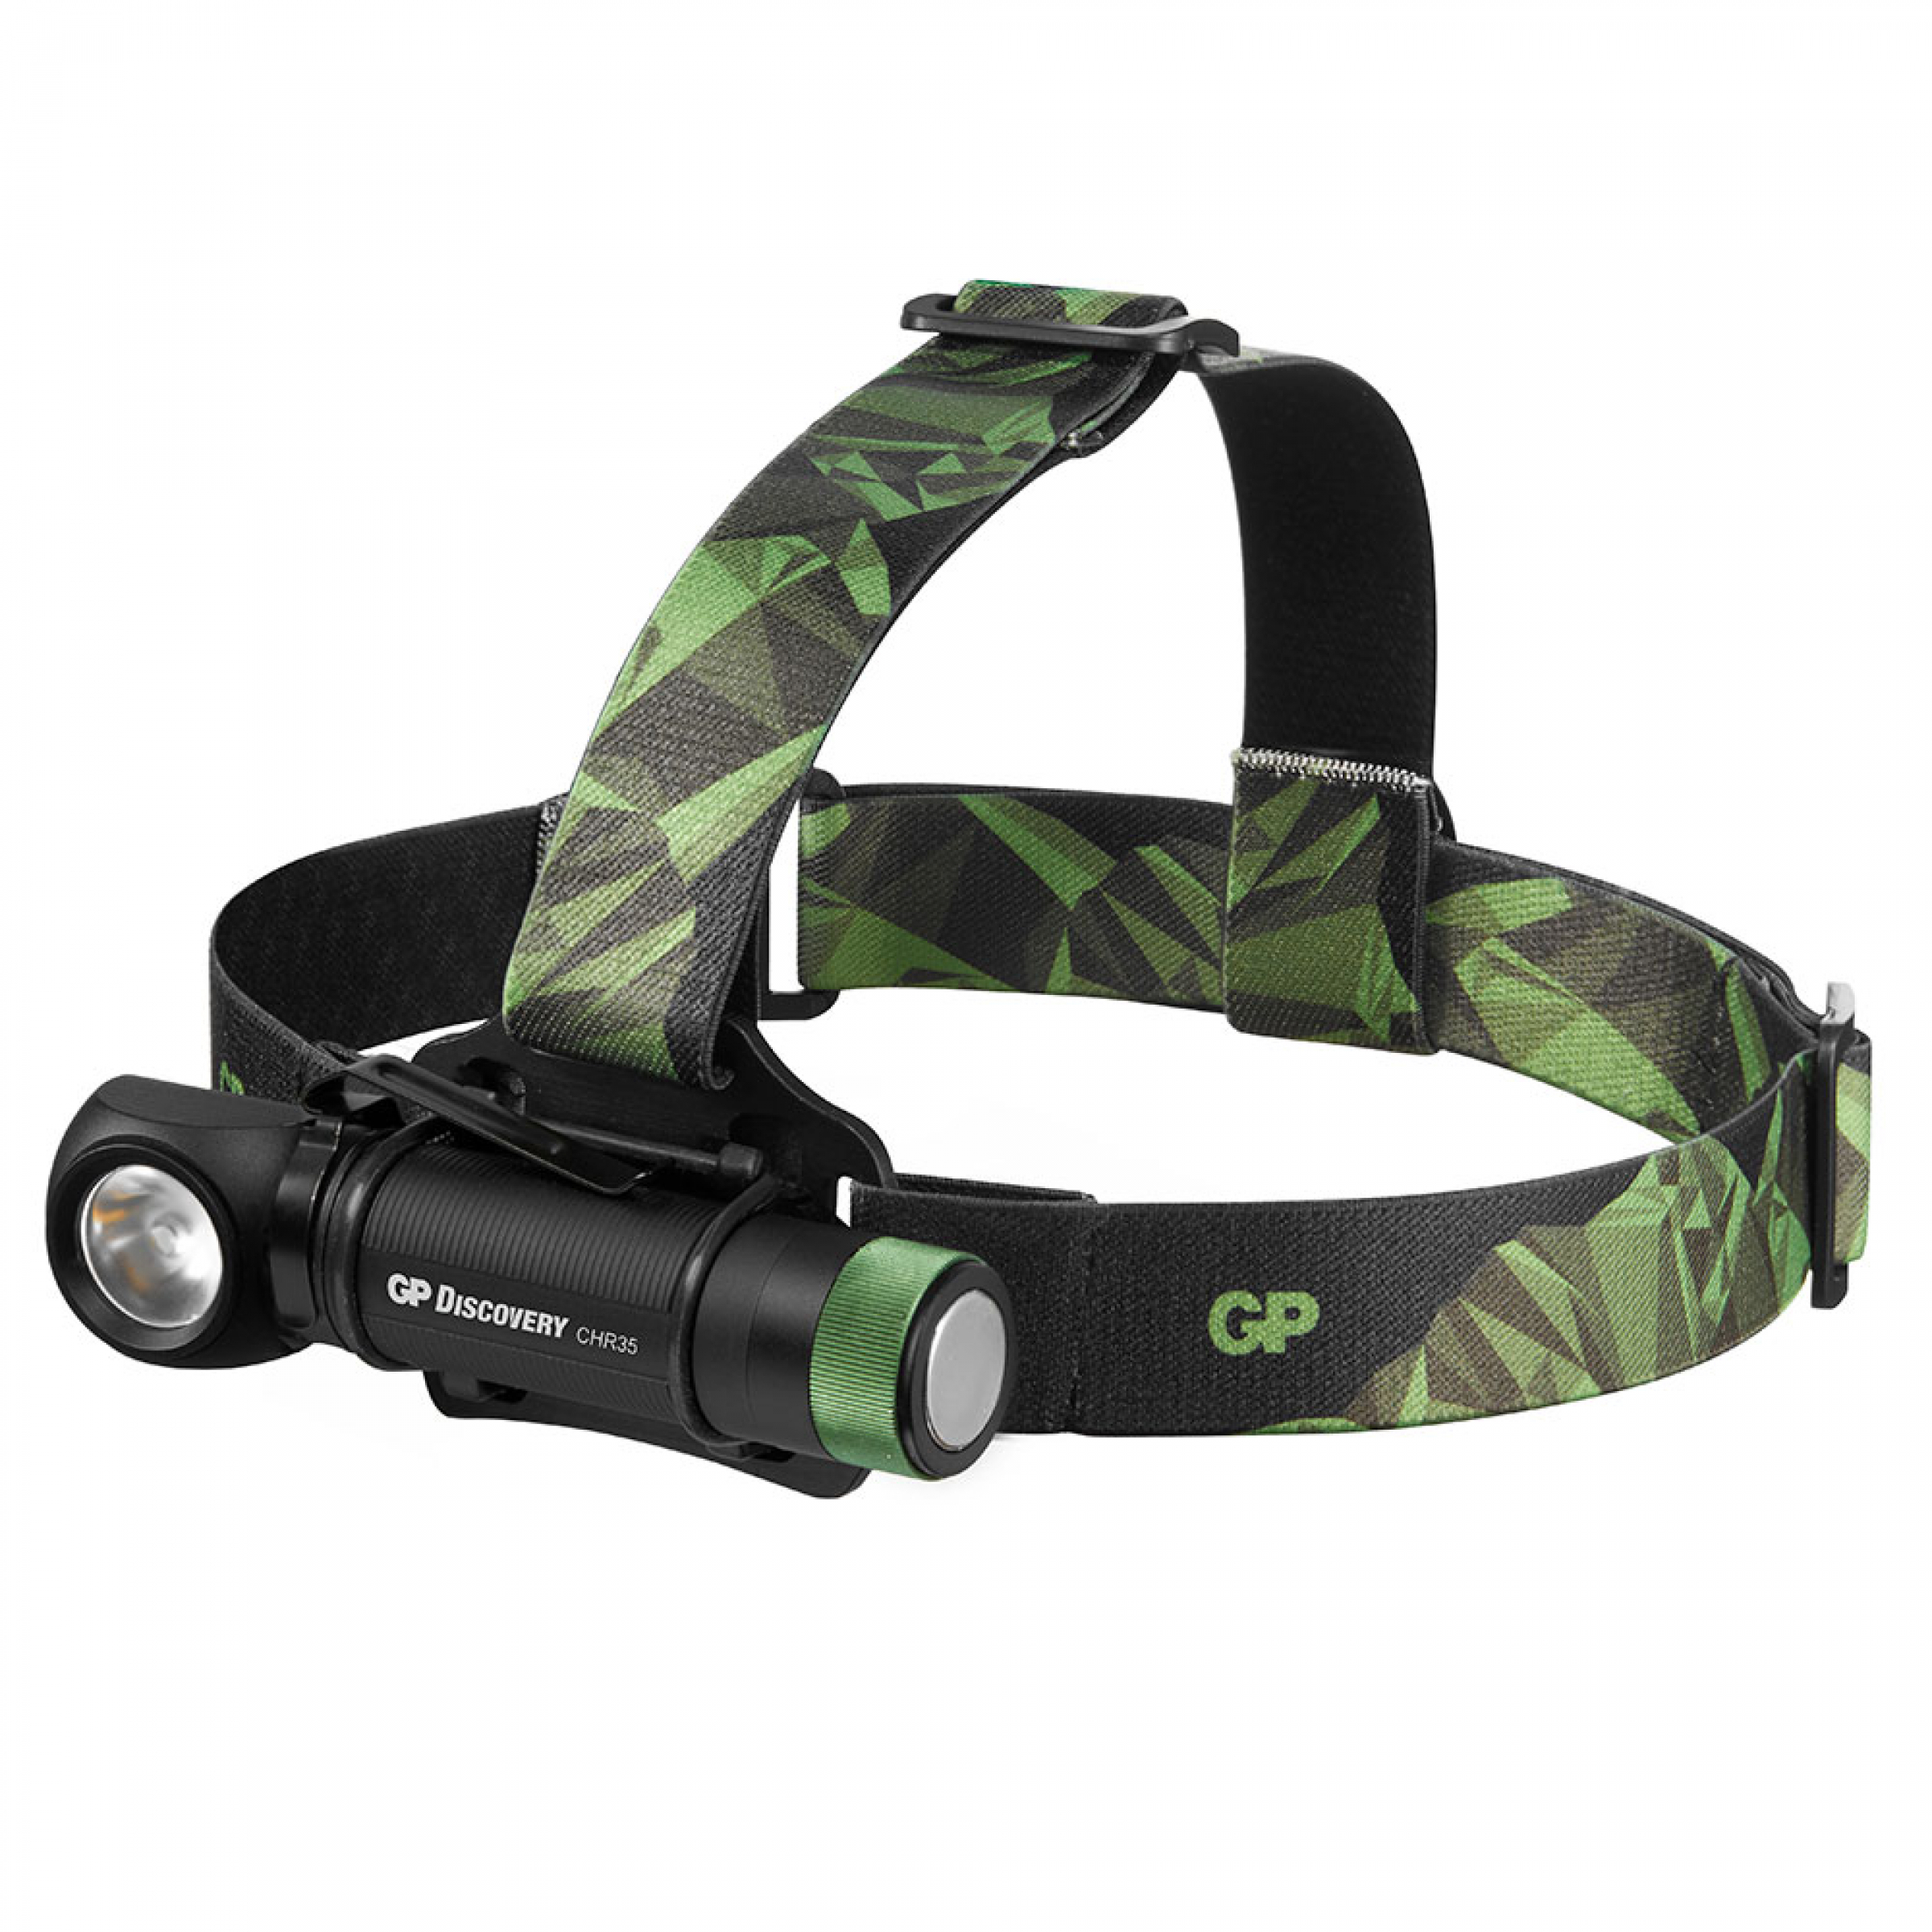 GP headlamp Discovery CH35 - 600 lumens incl. 18650 battery